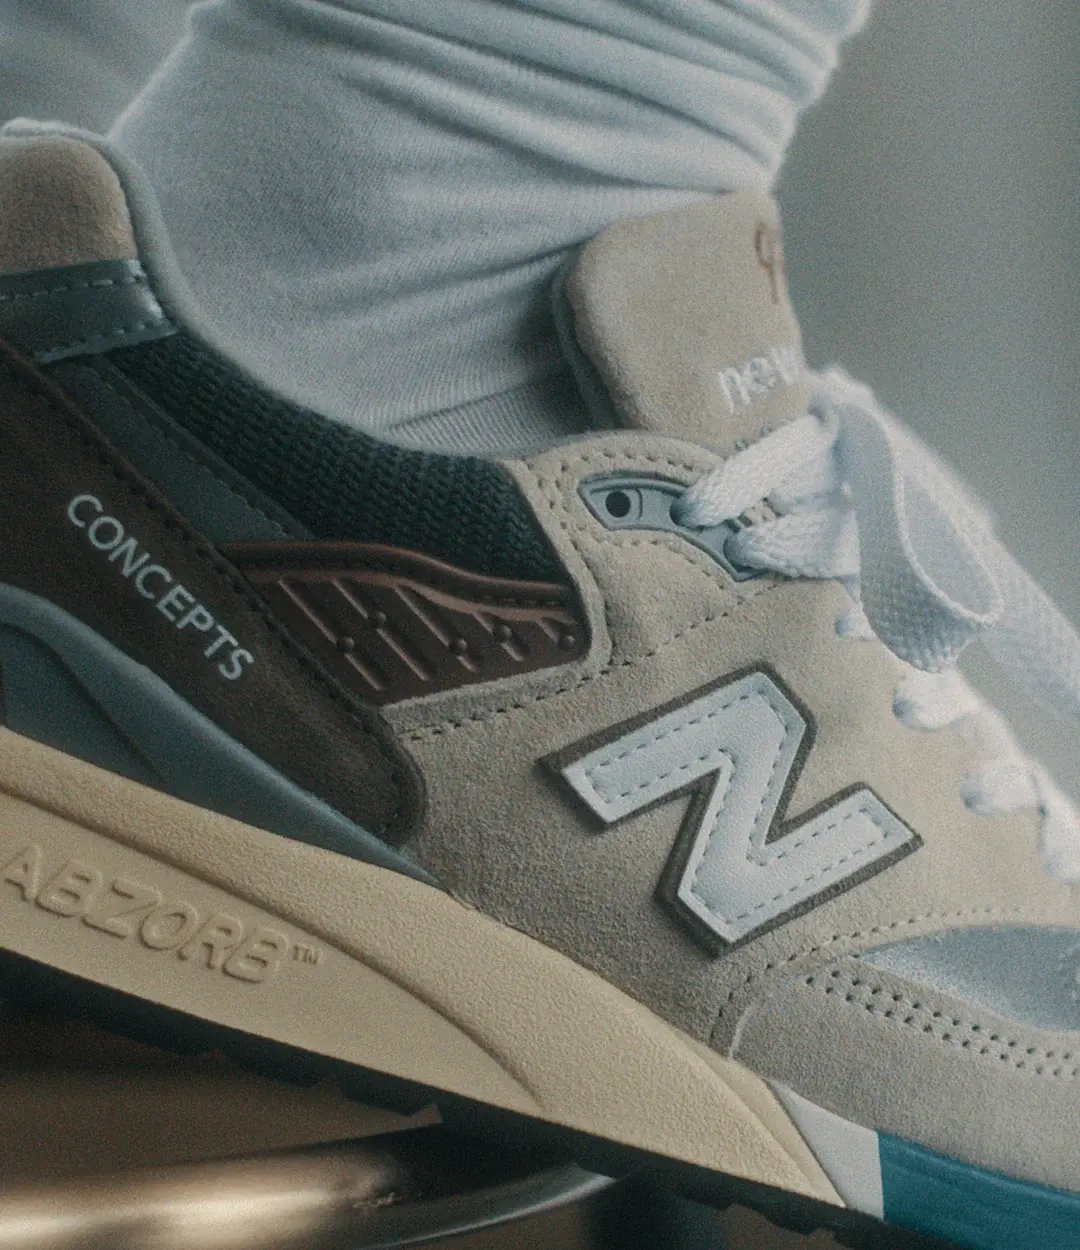 Concepts x New Balance 998 Made in USA 'C-Note'